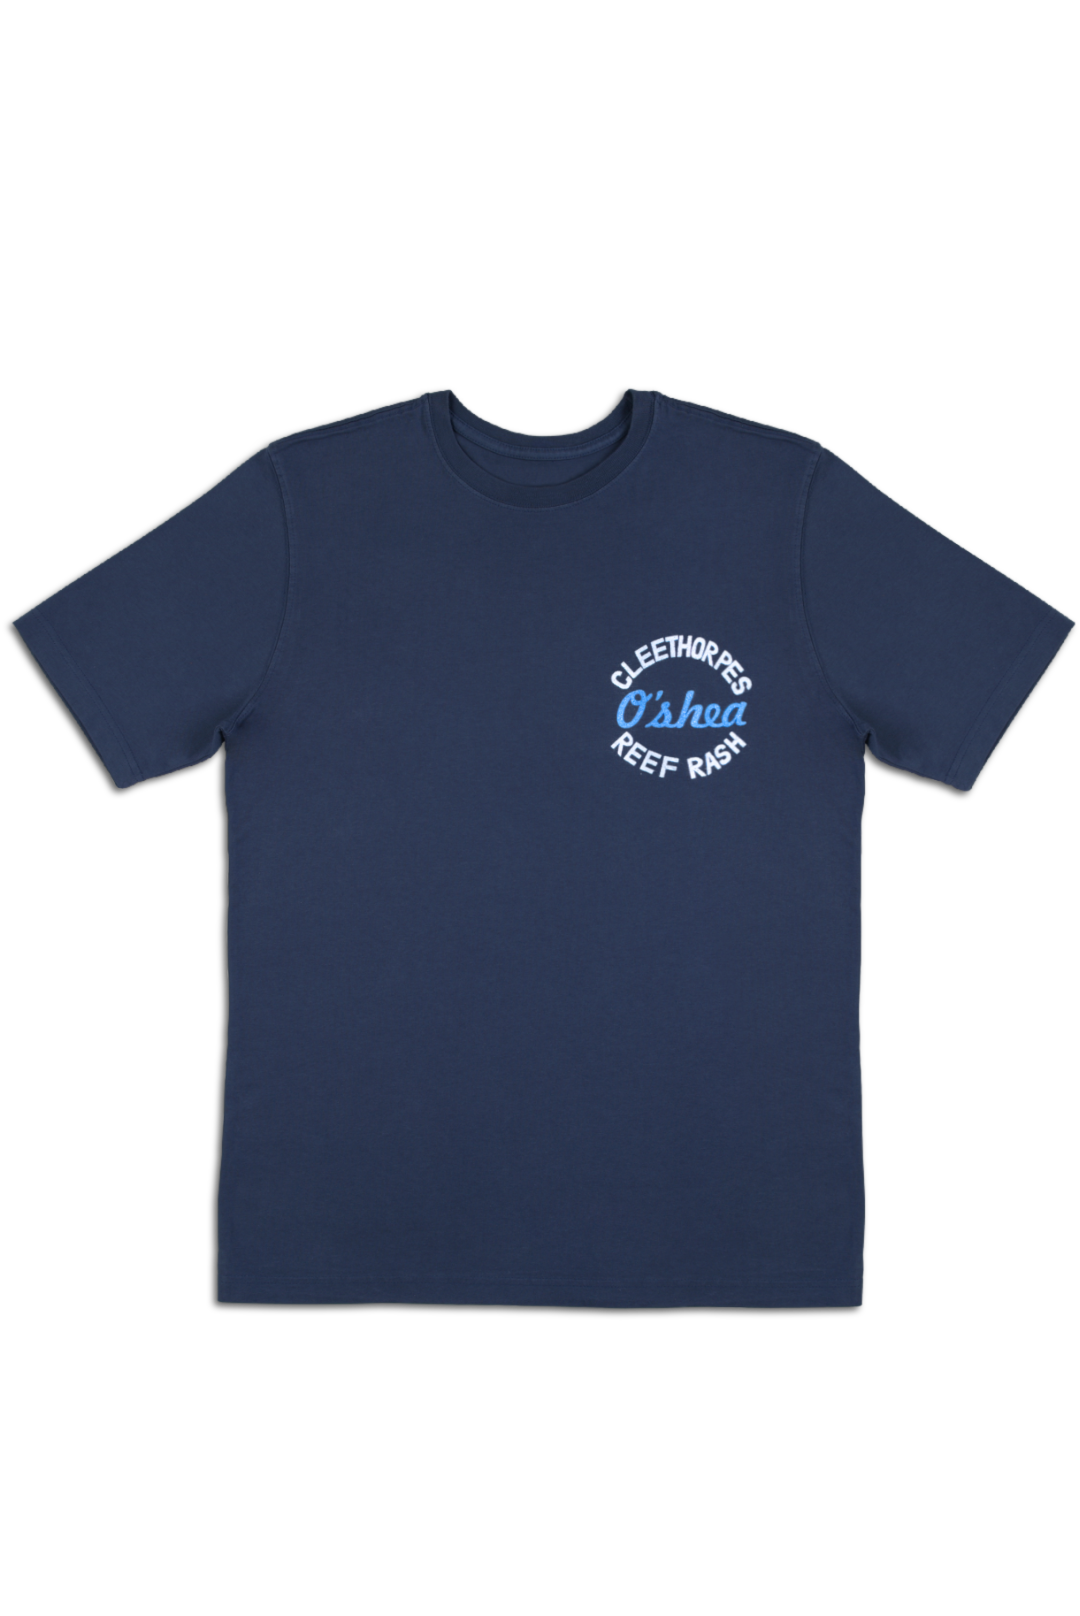 CLEETHORPES SEAS THE DAY -NAVY T-SHIRT